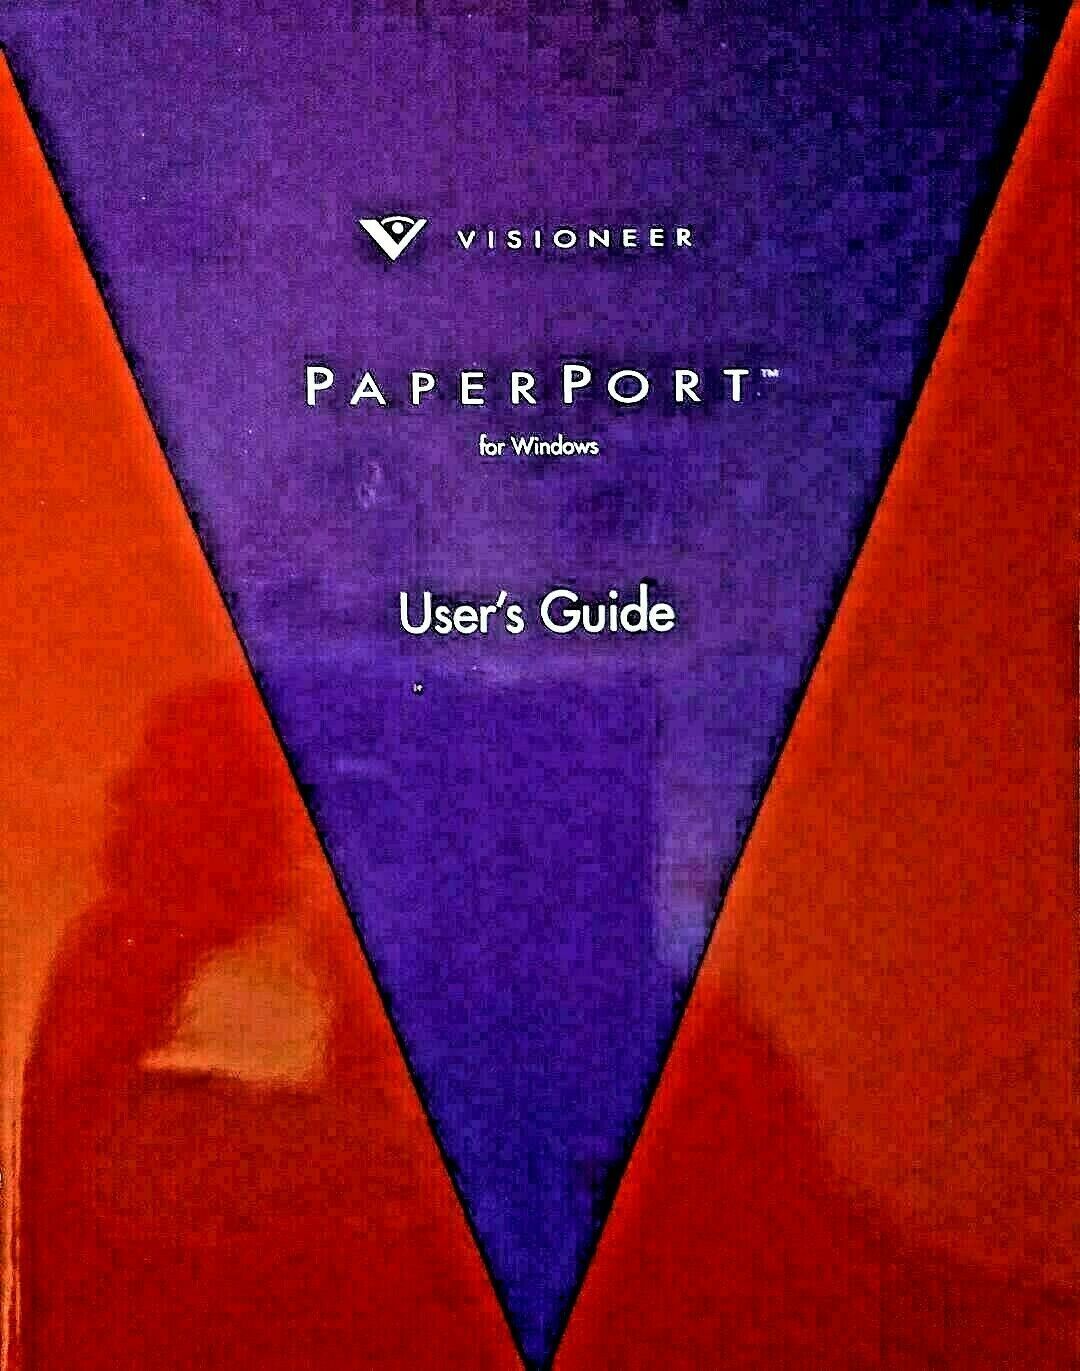 Visioneer PaperPort Software Users Guide for Windows Part No 05-0038-000 LikeNew